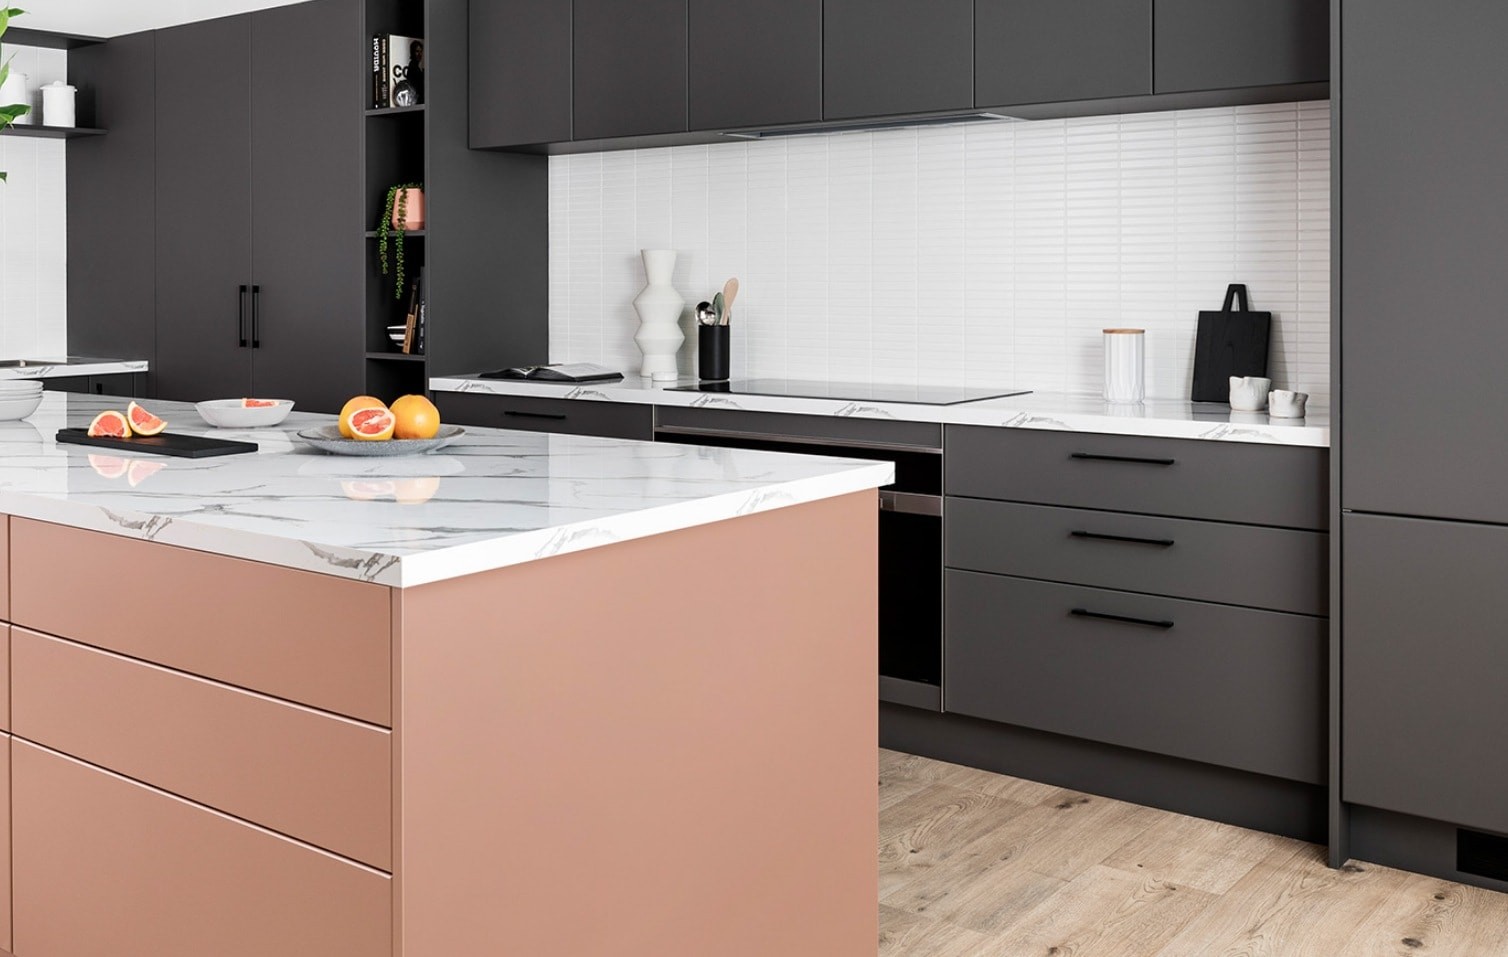 kaboodle kitchen dark grey and pink kitchen cabinets with white tiles